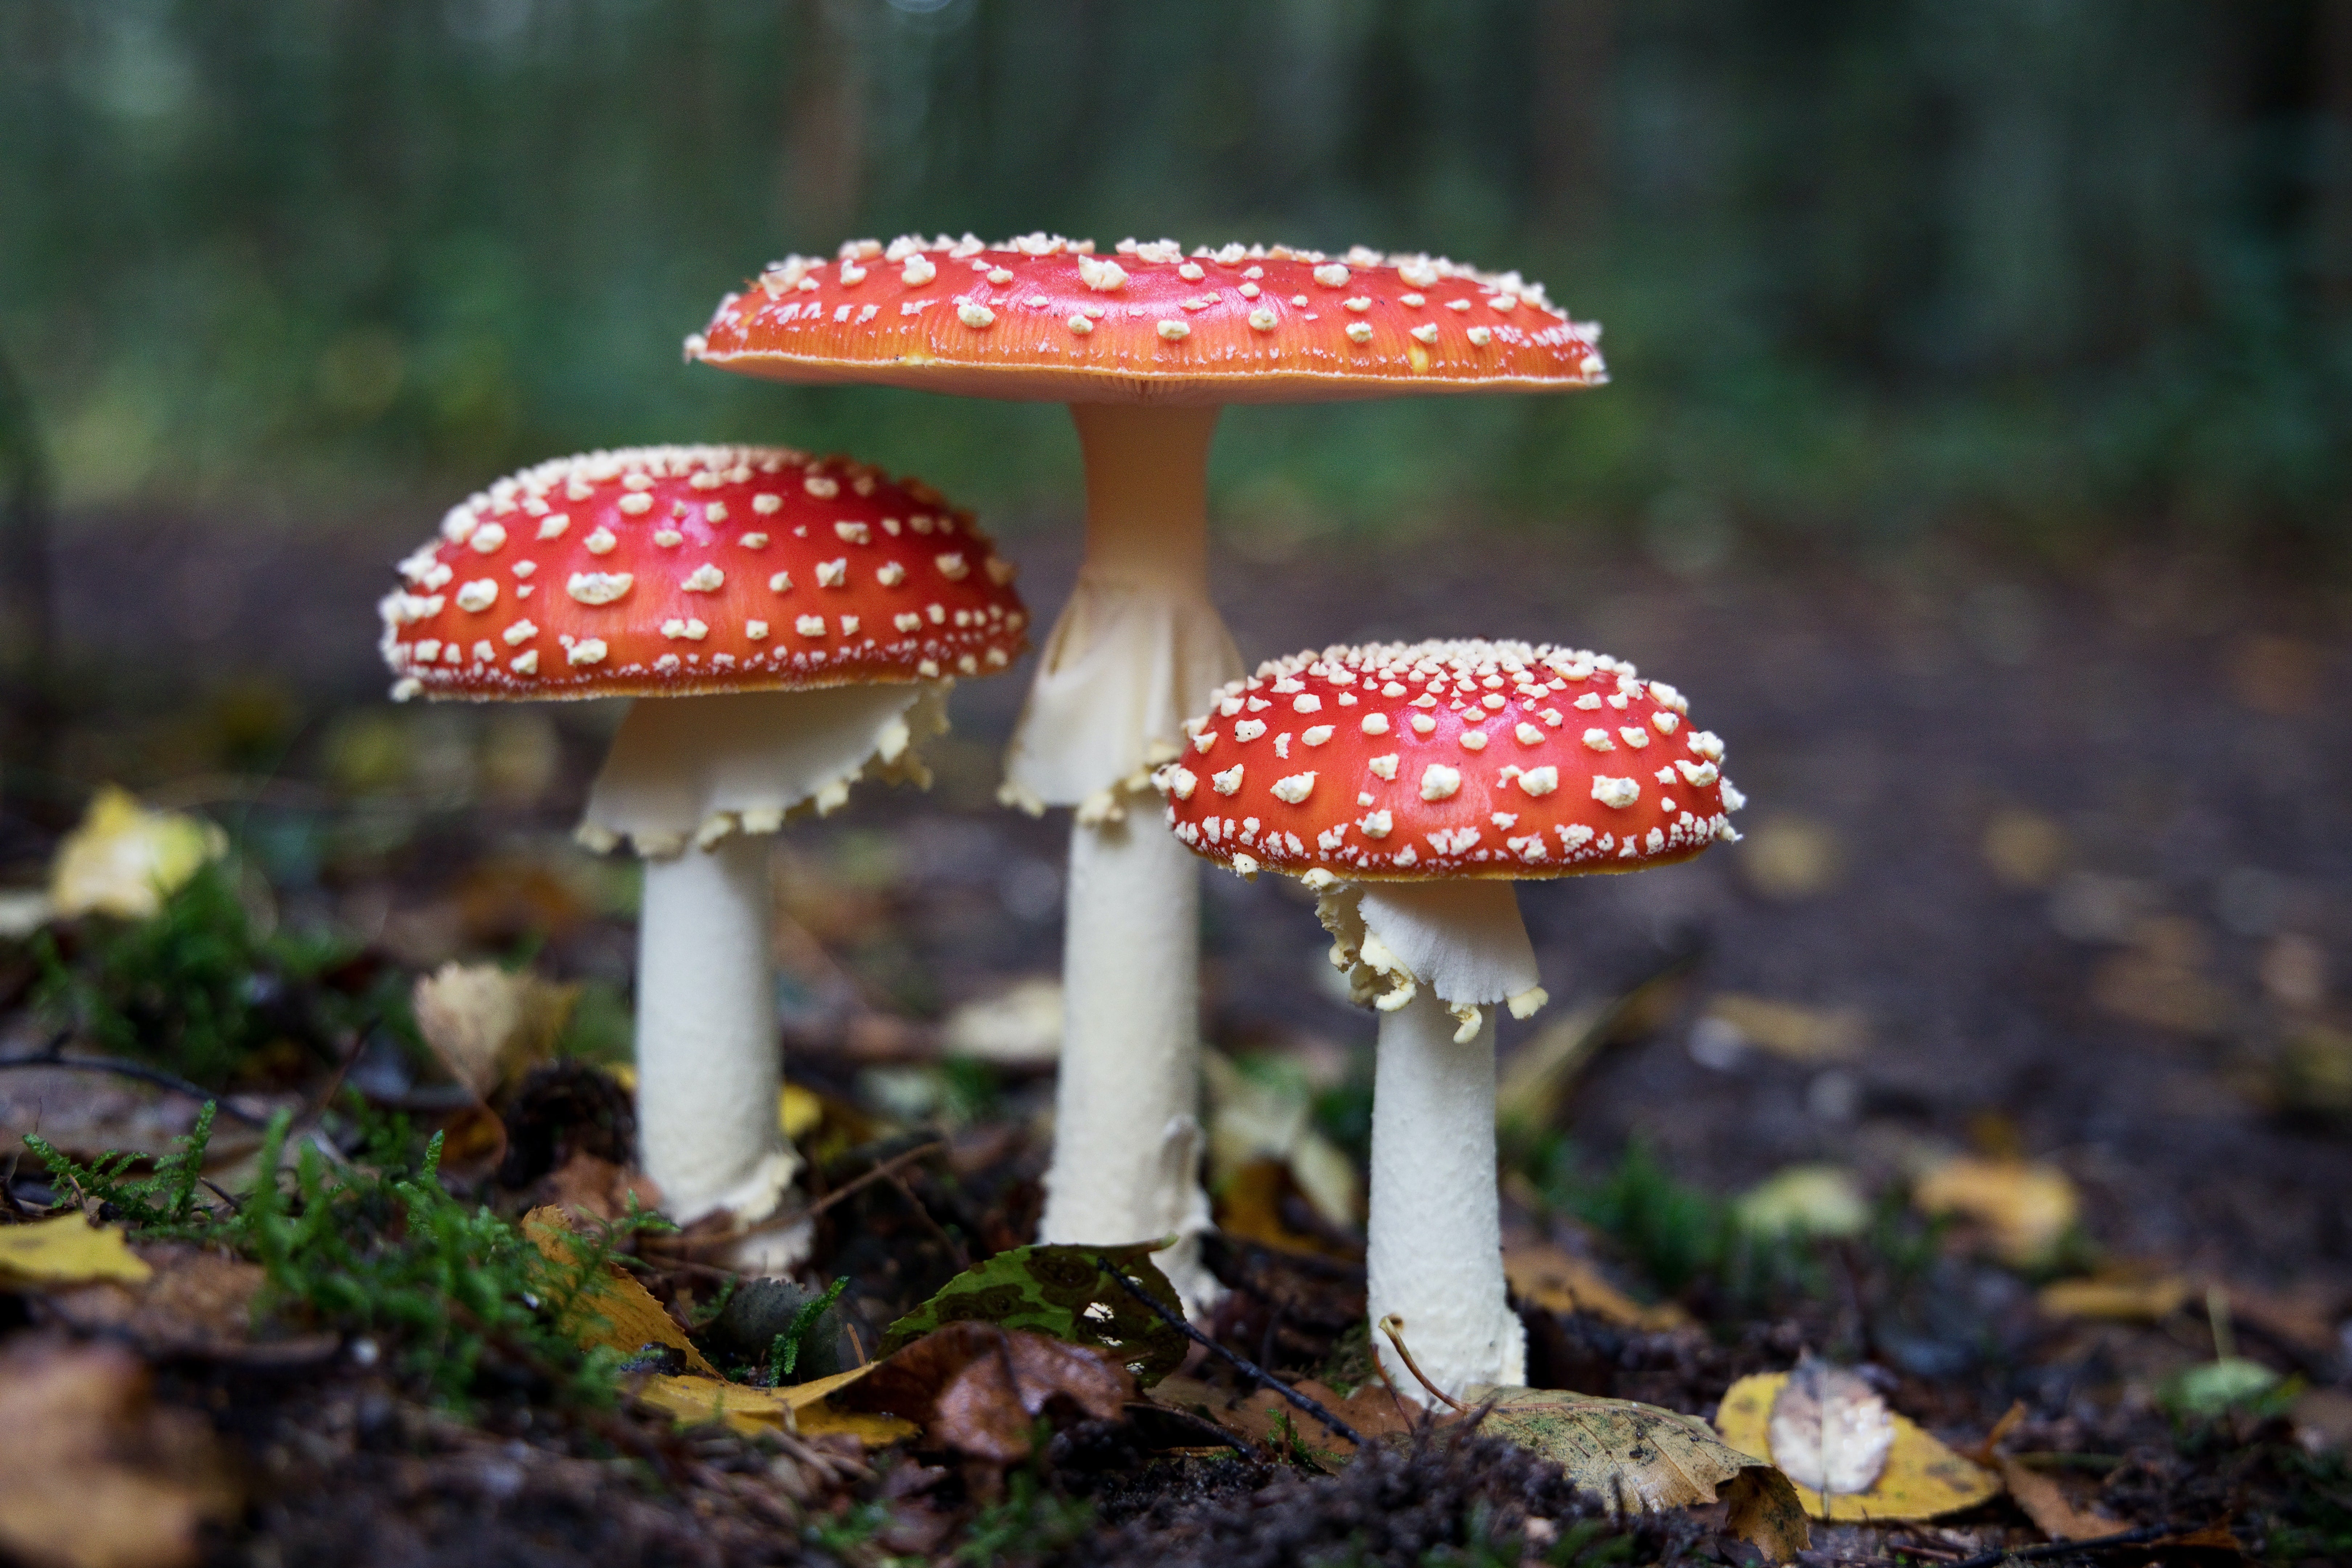 A collection of three mushrooms with red, white-spotted caps on the forest floor.